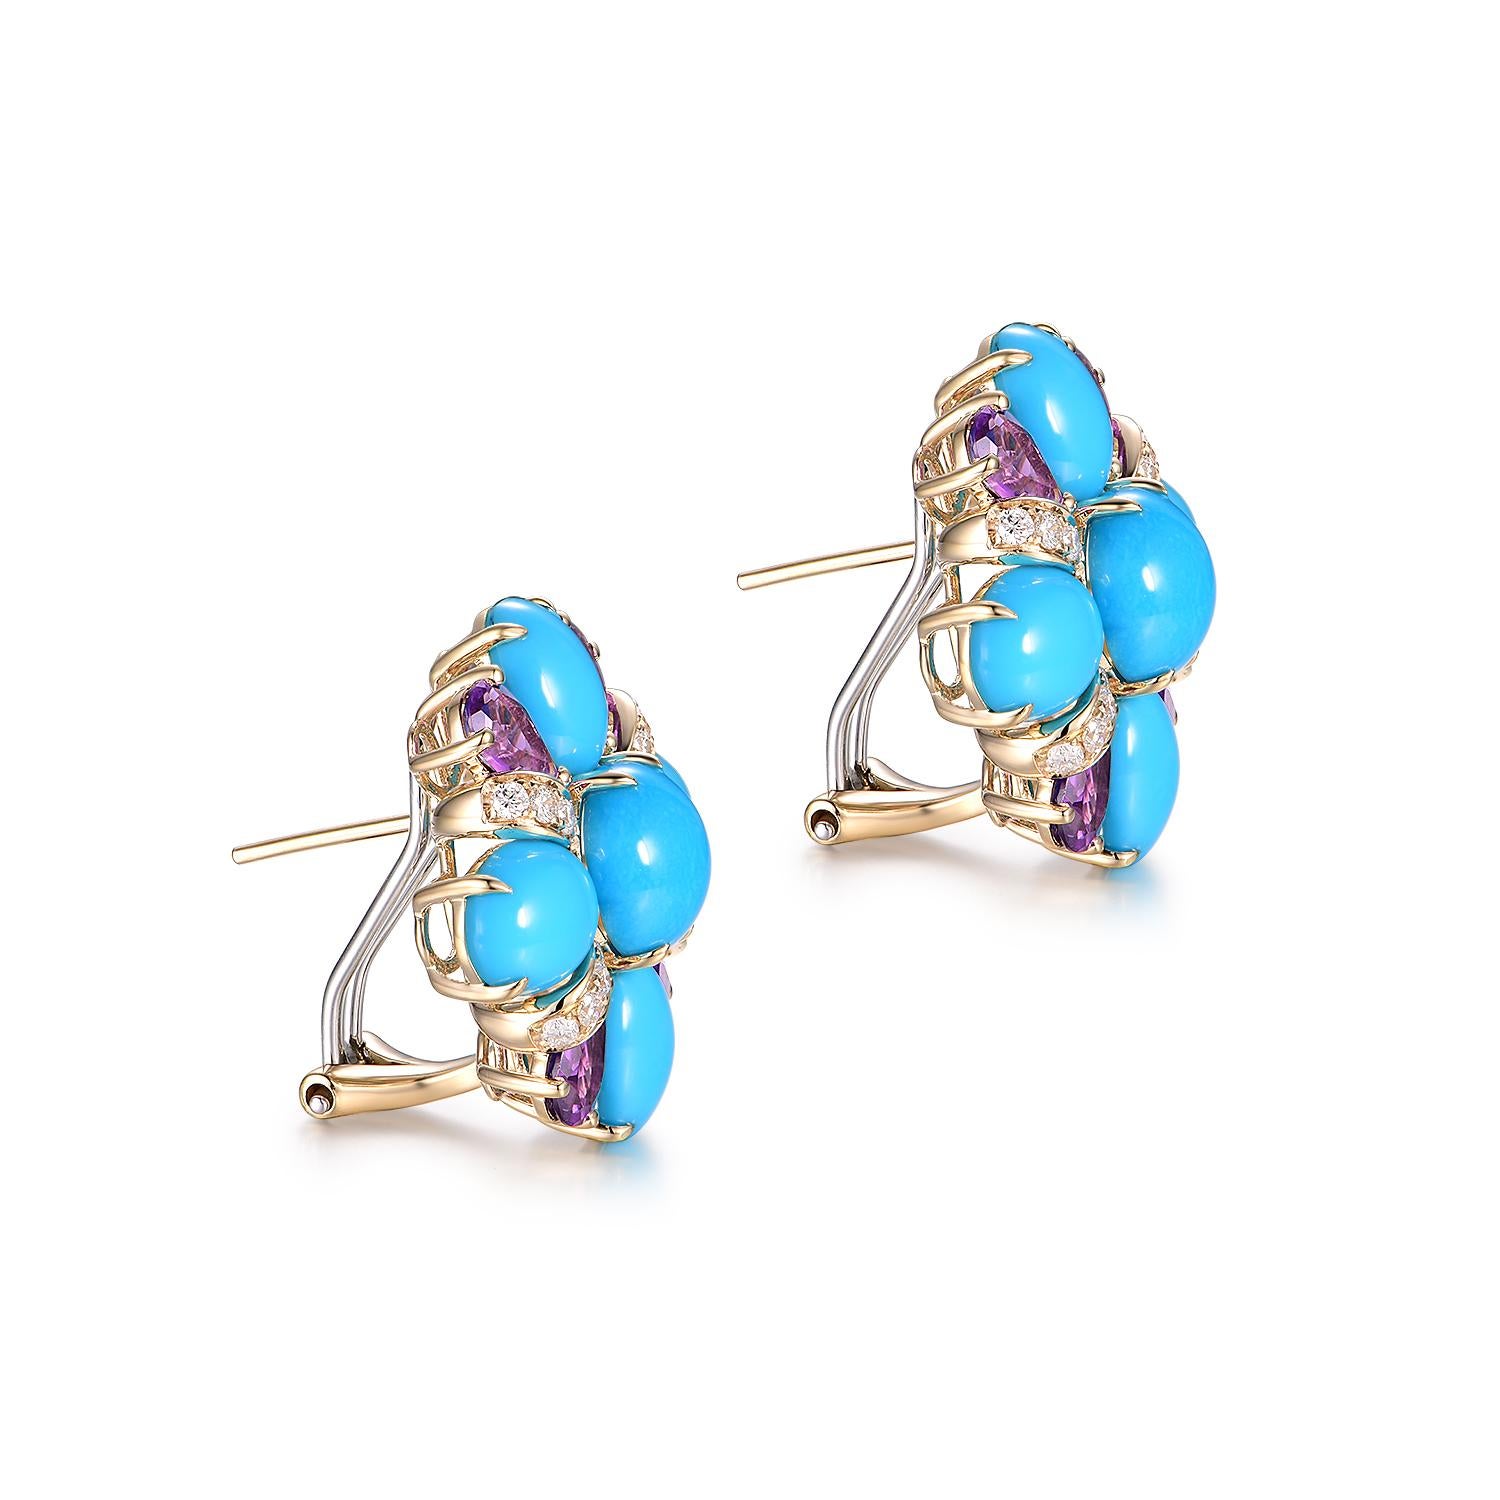 Contemporary Vintage Turquoise Amethyst Diamond Earrings in 14 Karat Yellow Gold For Sale